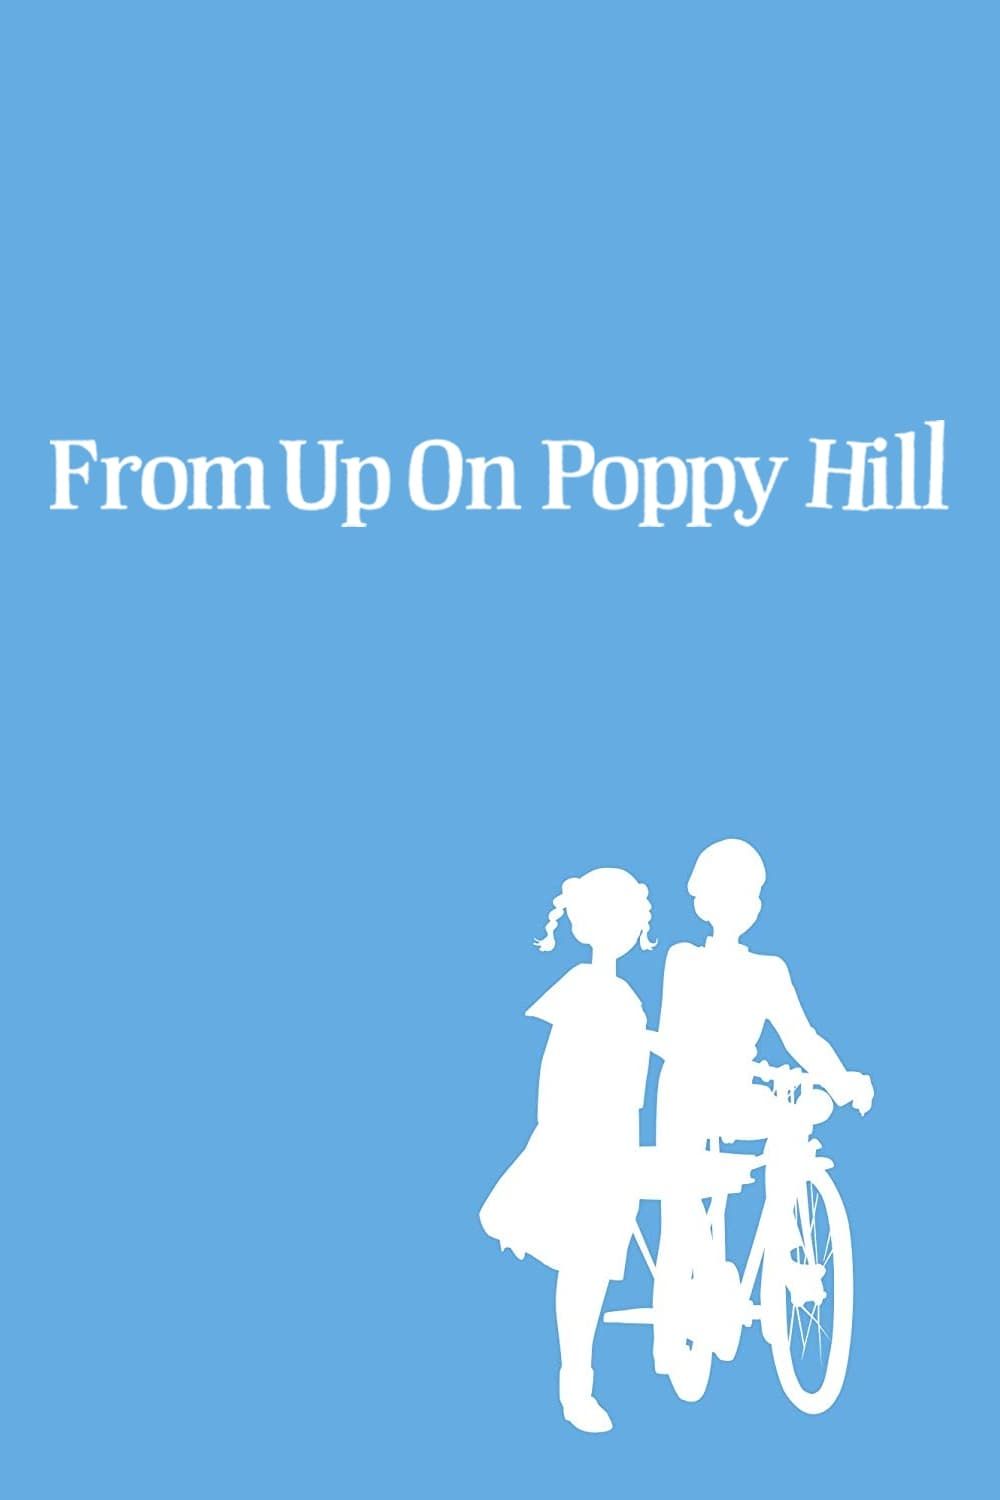 From Up on Poppy Hill (Dub)